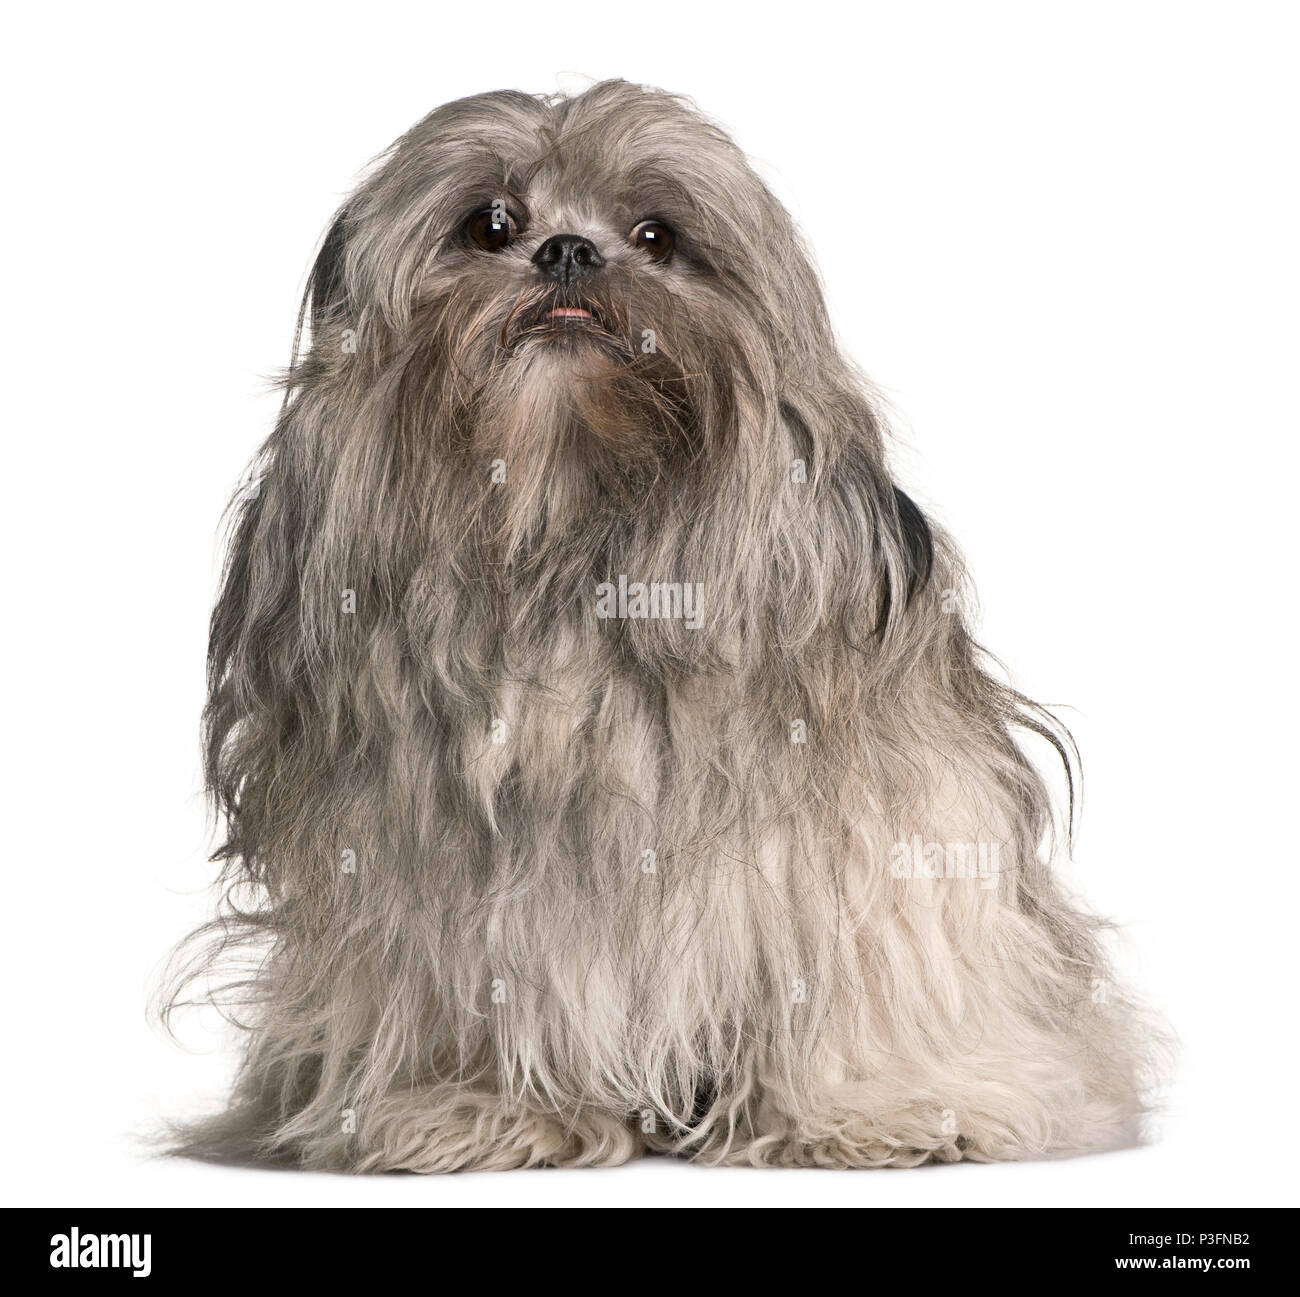 Lhasa apso, 2 years old, sitting in front of white background Stock Photo